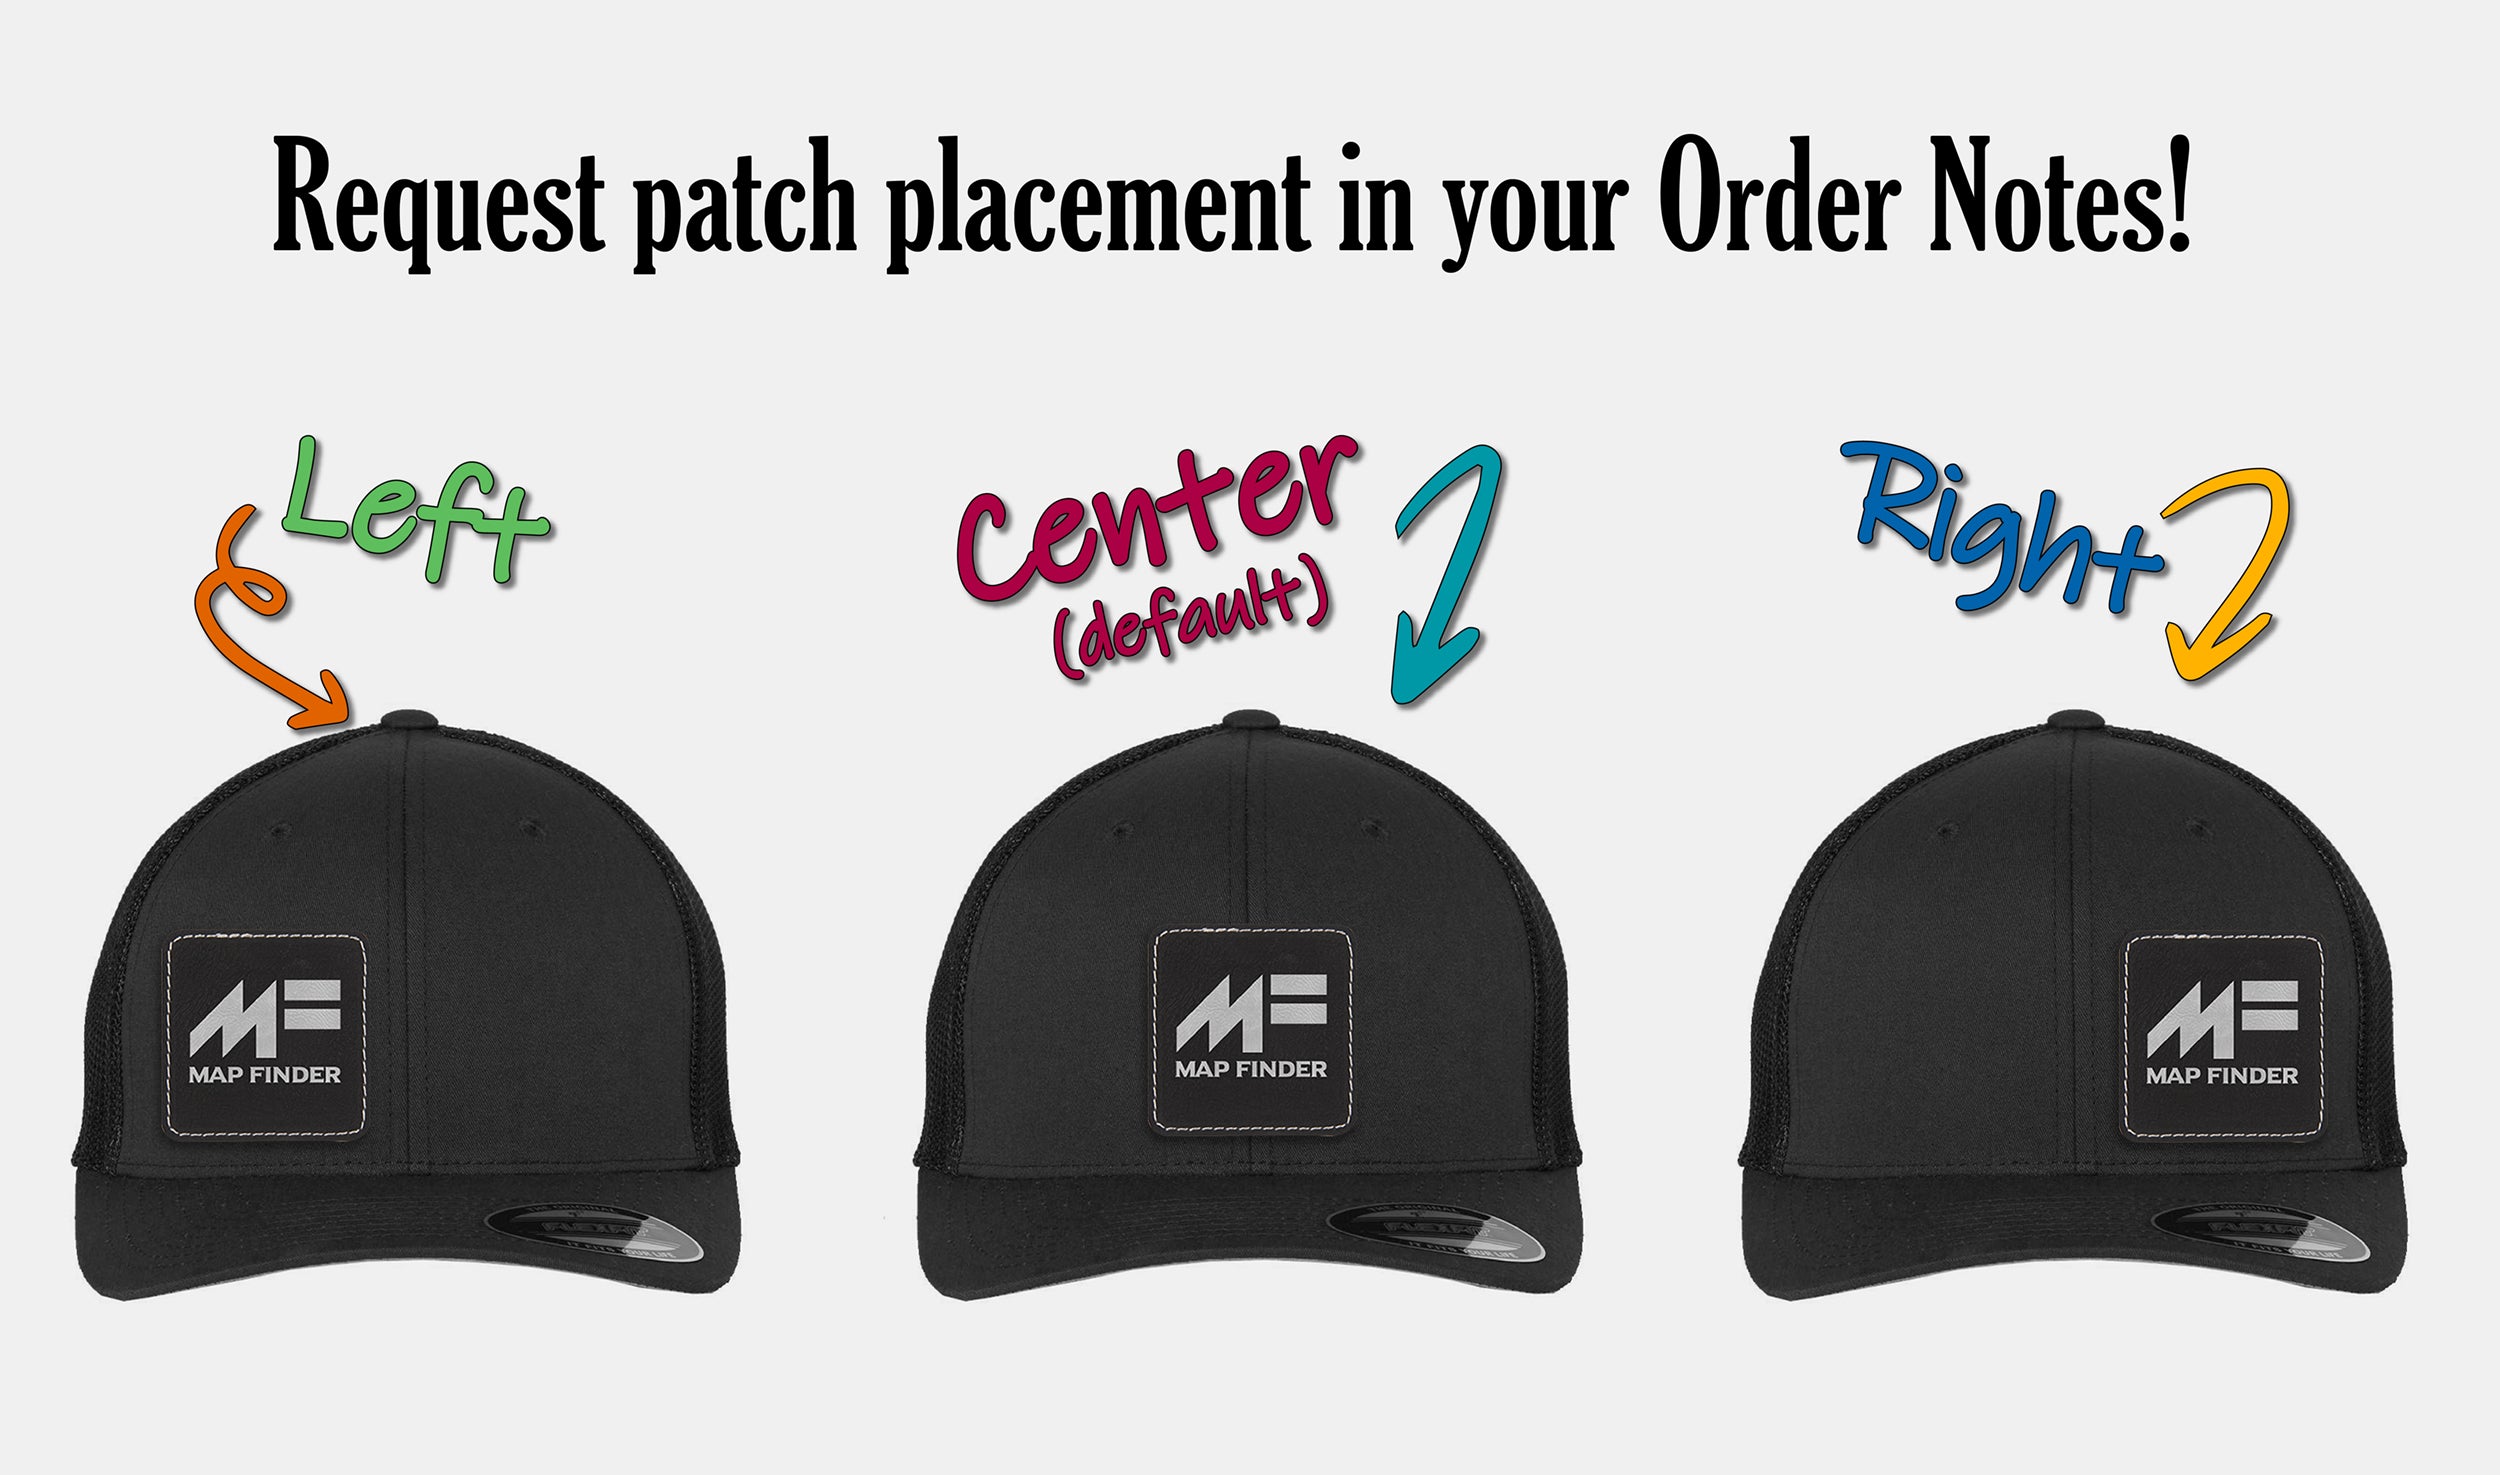 Learn All About How To Put Patches On Hats - Master Custom Patches